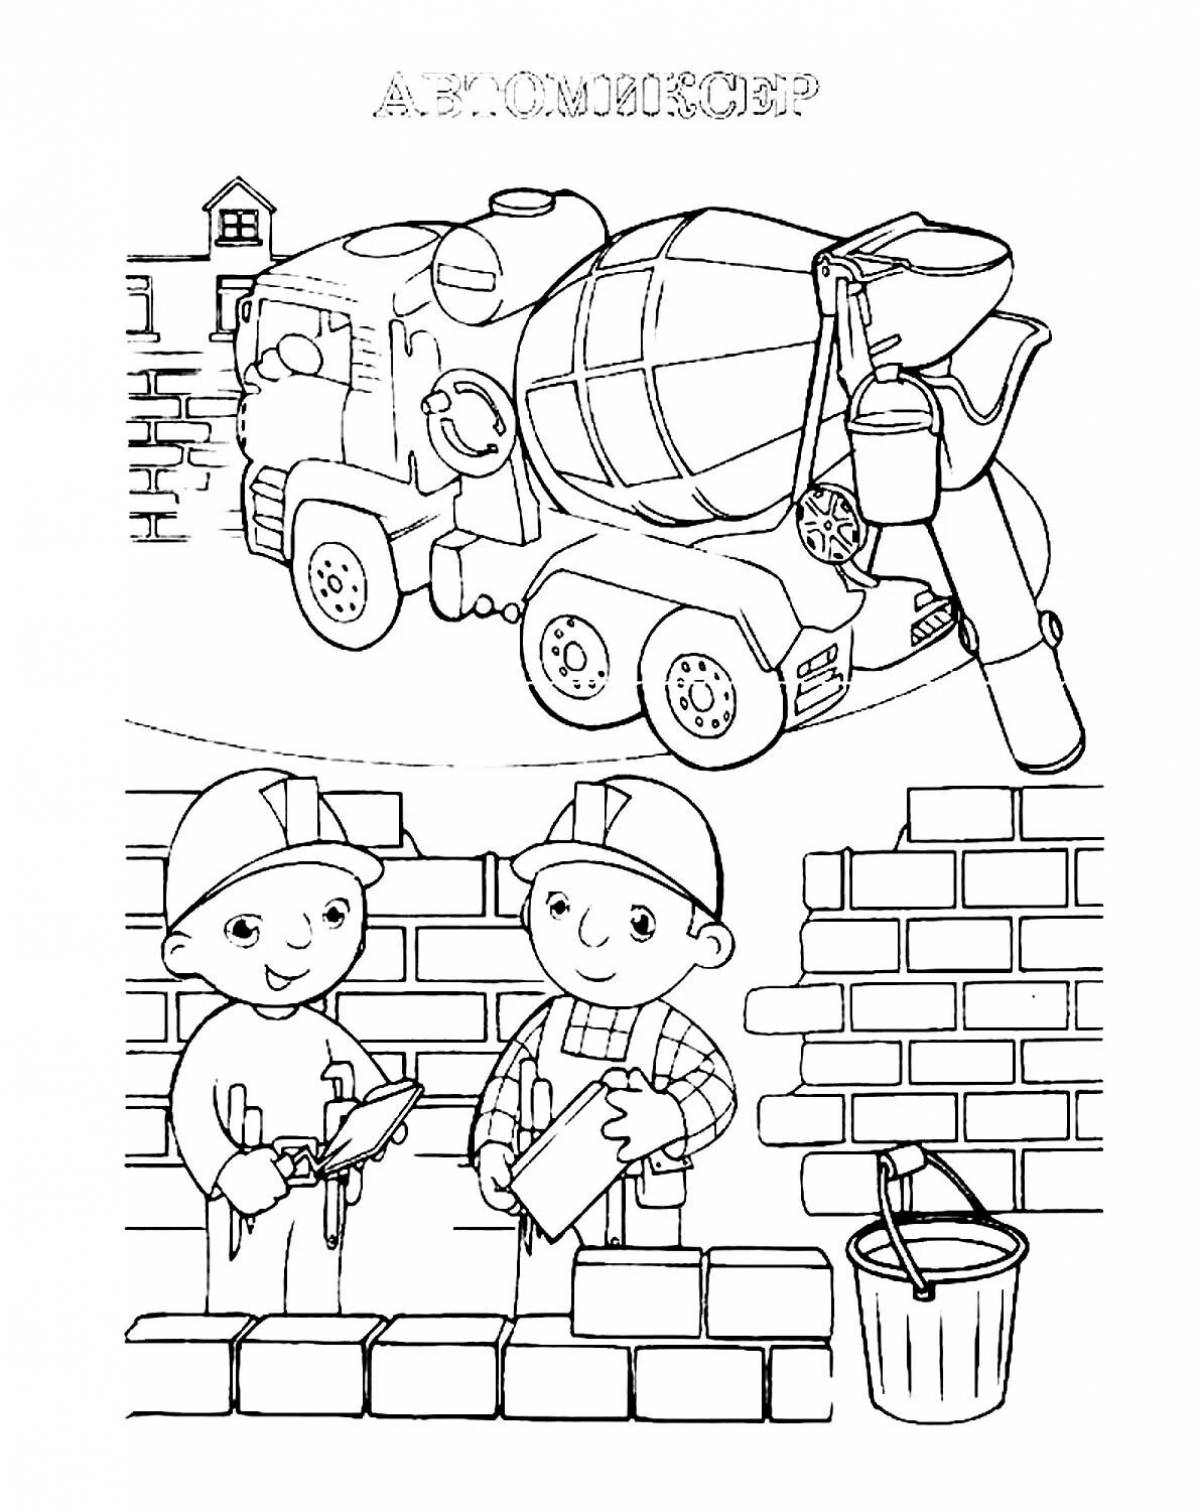 Figurative labor protection through the eyes of children for preschoolers